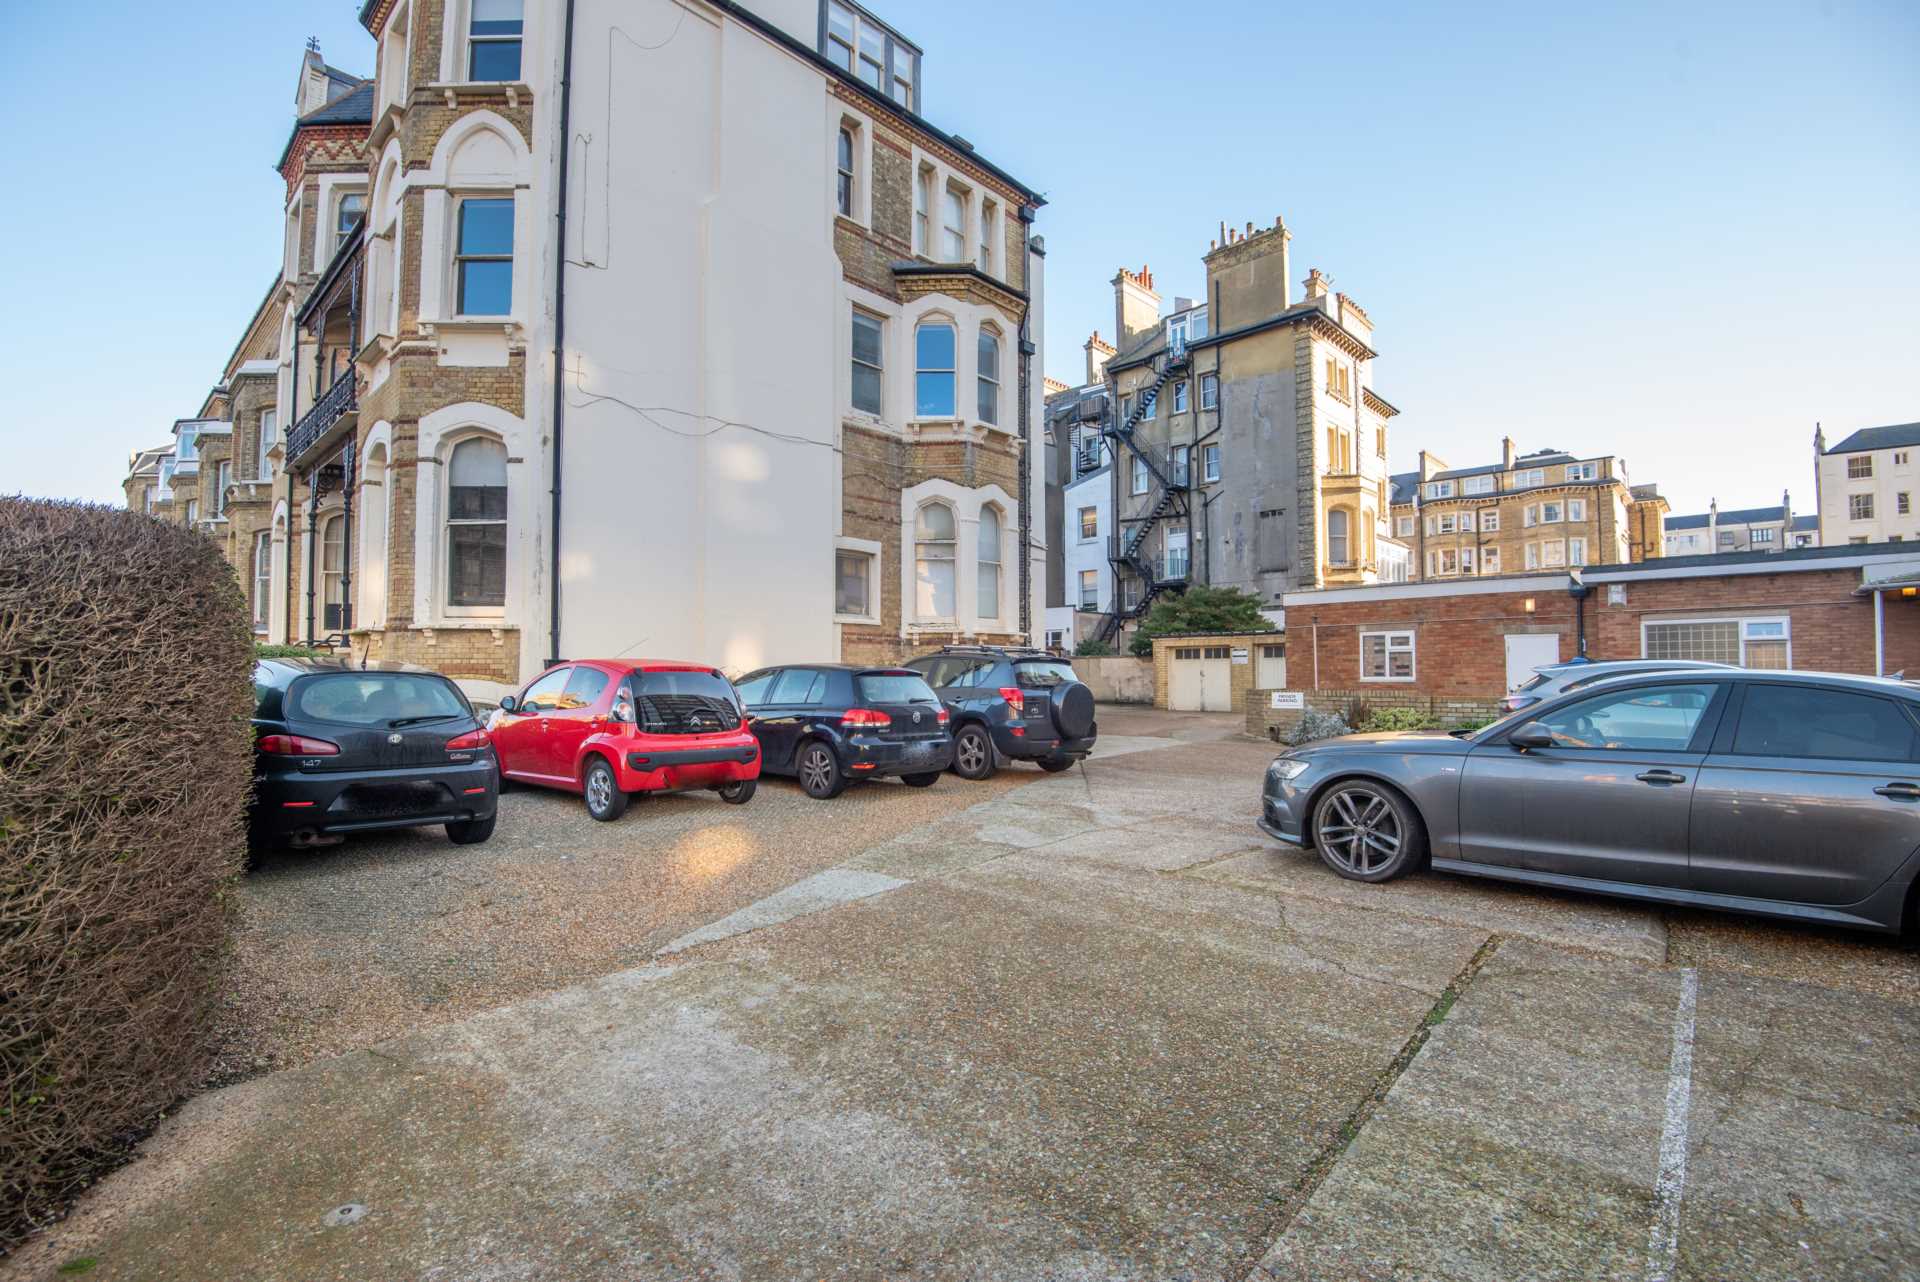 Second Avenue Three Bedroom Apartment Hove with TWO CAR PARKING SPACES. HOLIDAY LET/SHORT LETS DOG FRIENDLY, Image 13